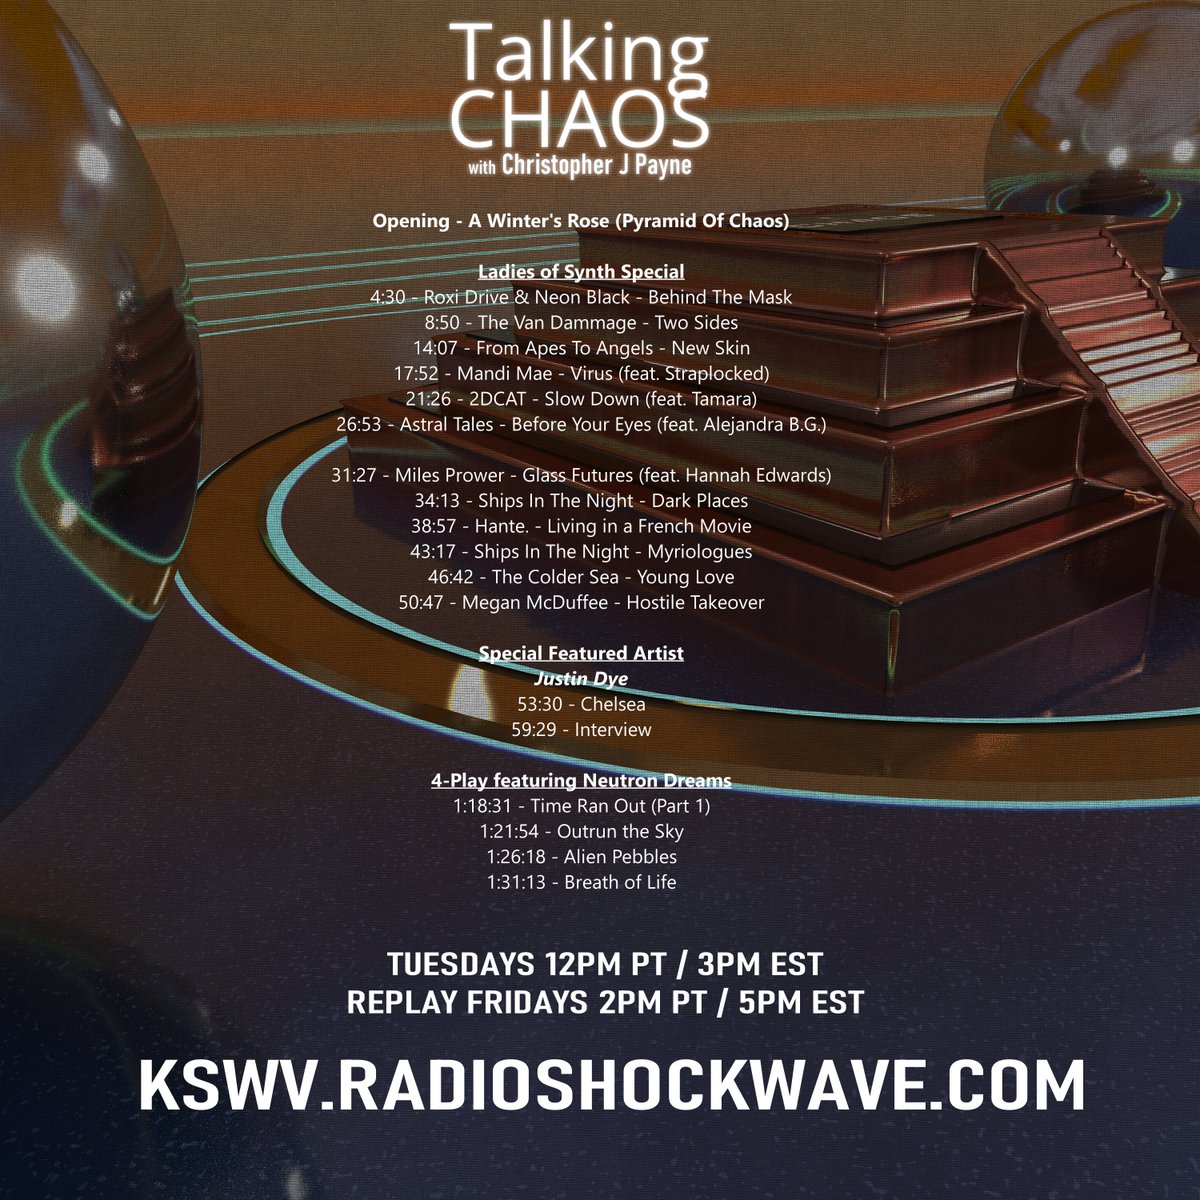 #TuneIn to Talking Chaos Episode 3 today for an exclusive interview with @iamtothestars and a Ladies of Synth Special, only on #KSWVRadioShockwave @RetrosynthR @NeutronDreams @Oxygenet32 #Synthwave #Podcast #ElectronicMusic